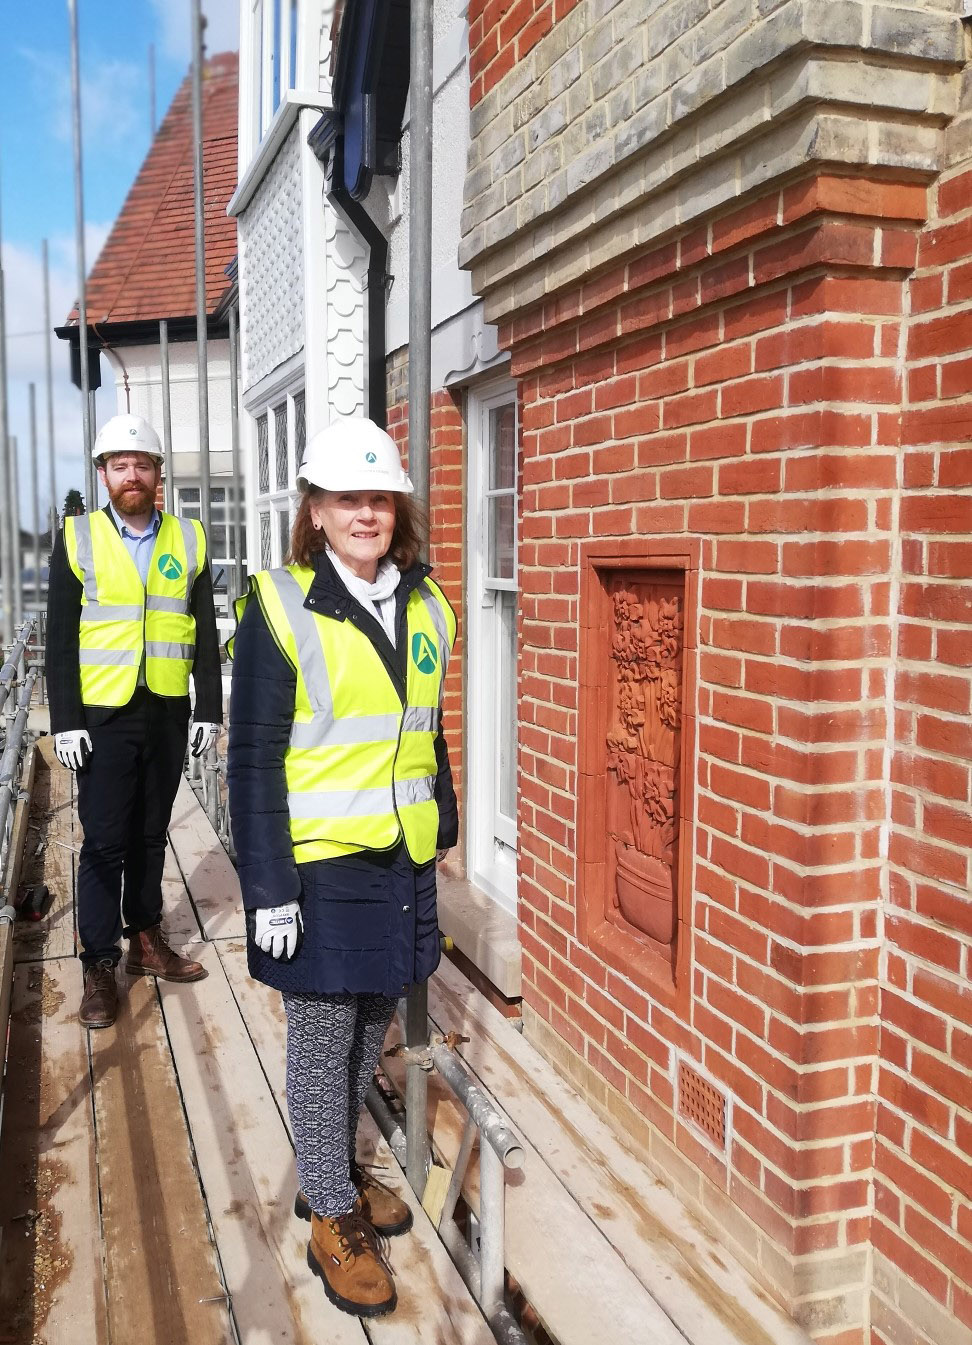 Topping out at Creffield Villas heralds sale of new homes and apartments in Lexden